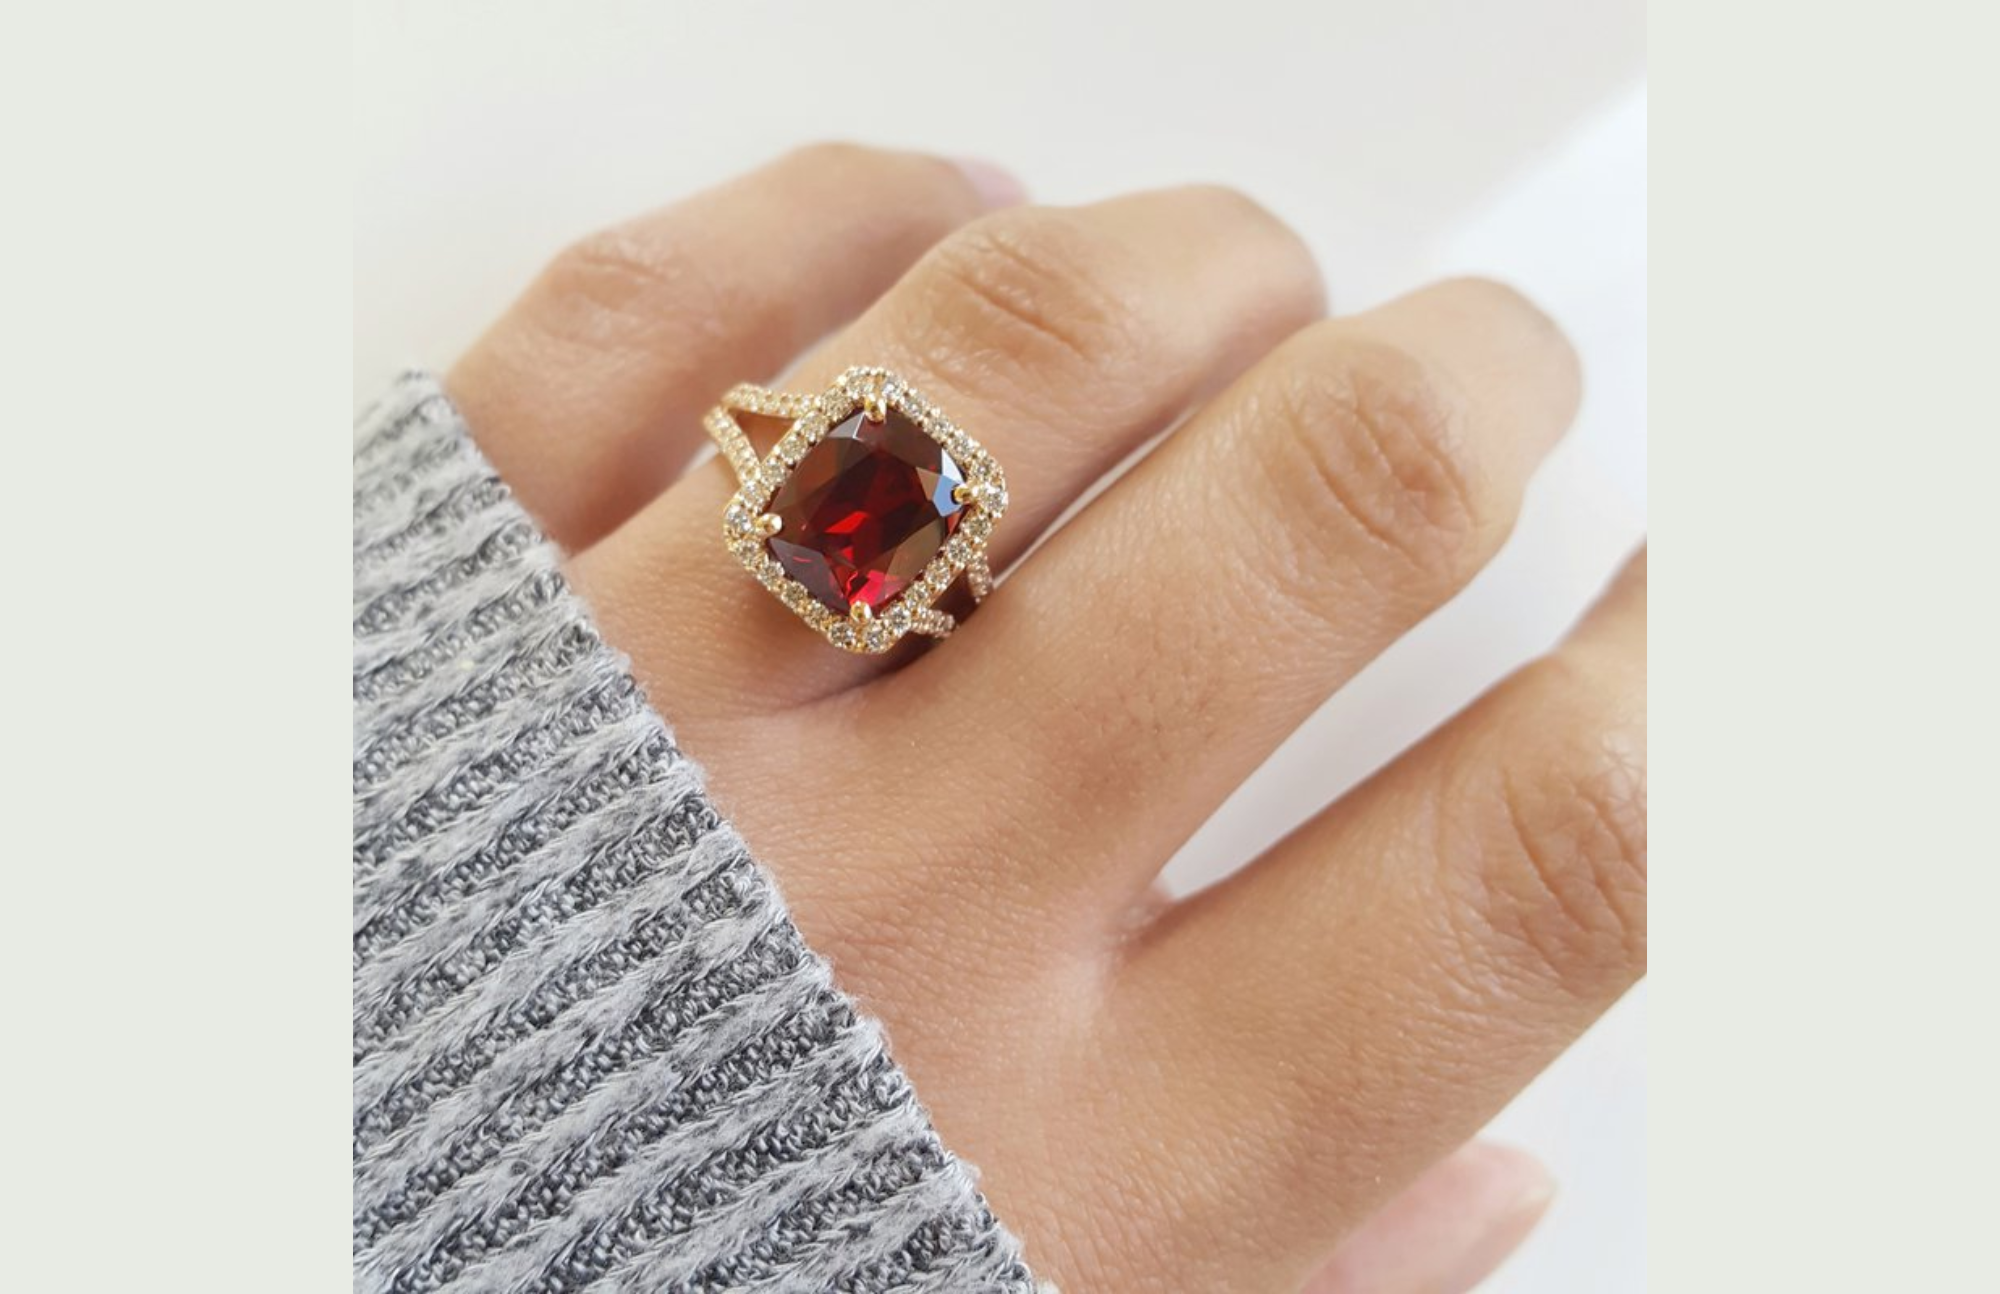 14k rose gold with a real garnet in an extended cushion shape measuring 4.90 carats on a woman's ring finger